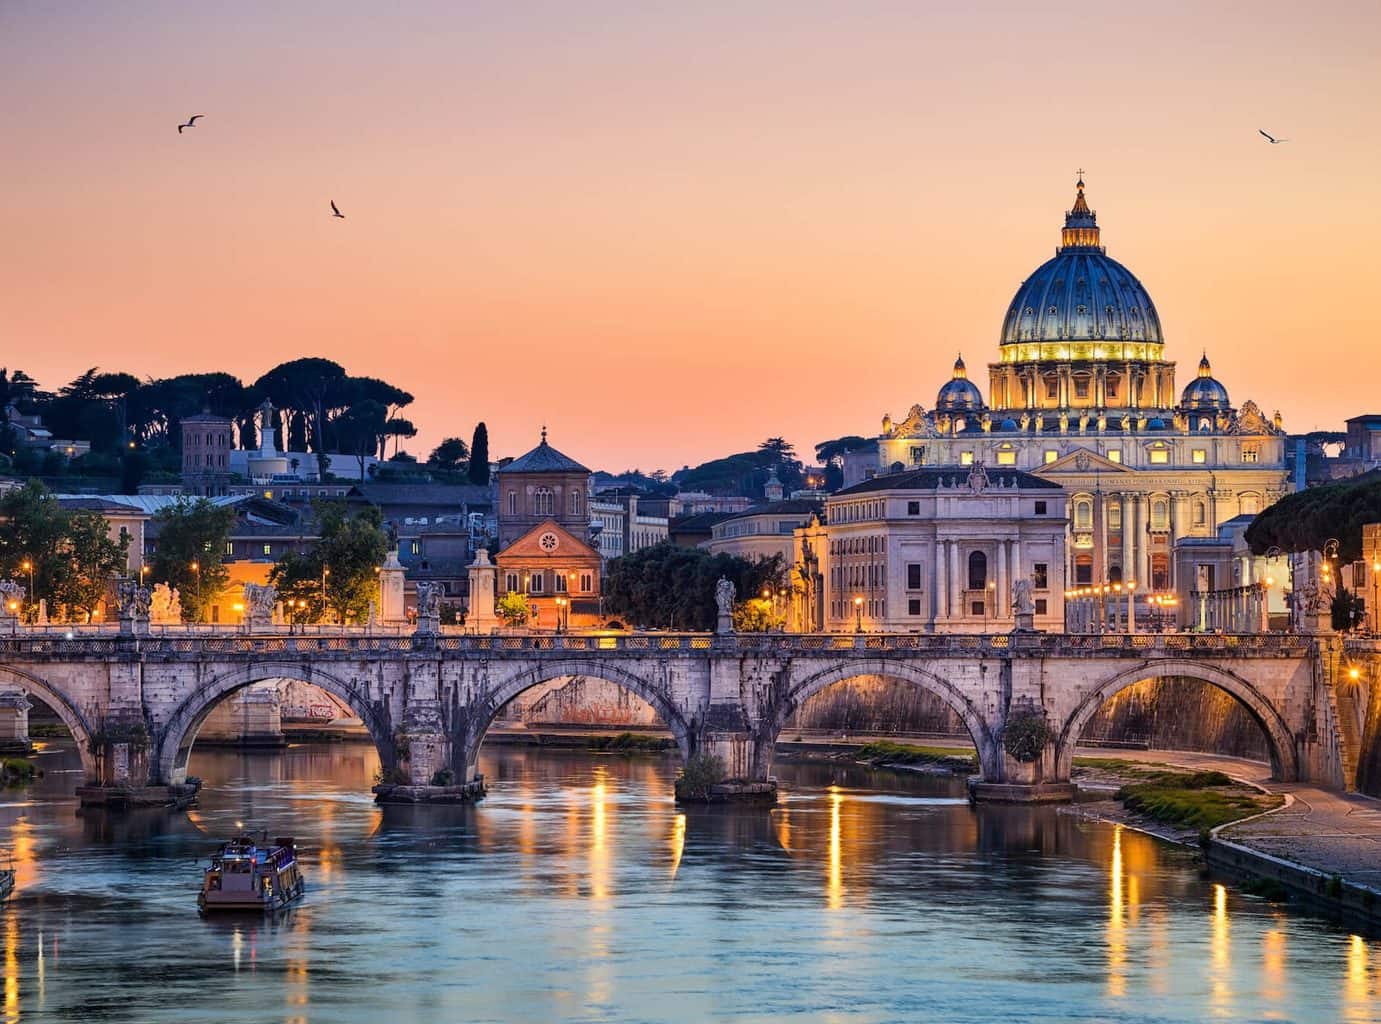 Luxury Rome Holiday - Bridge, river and architecture shot